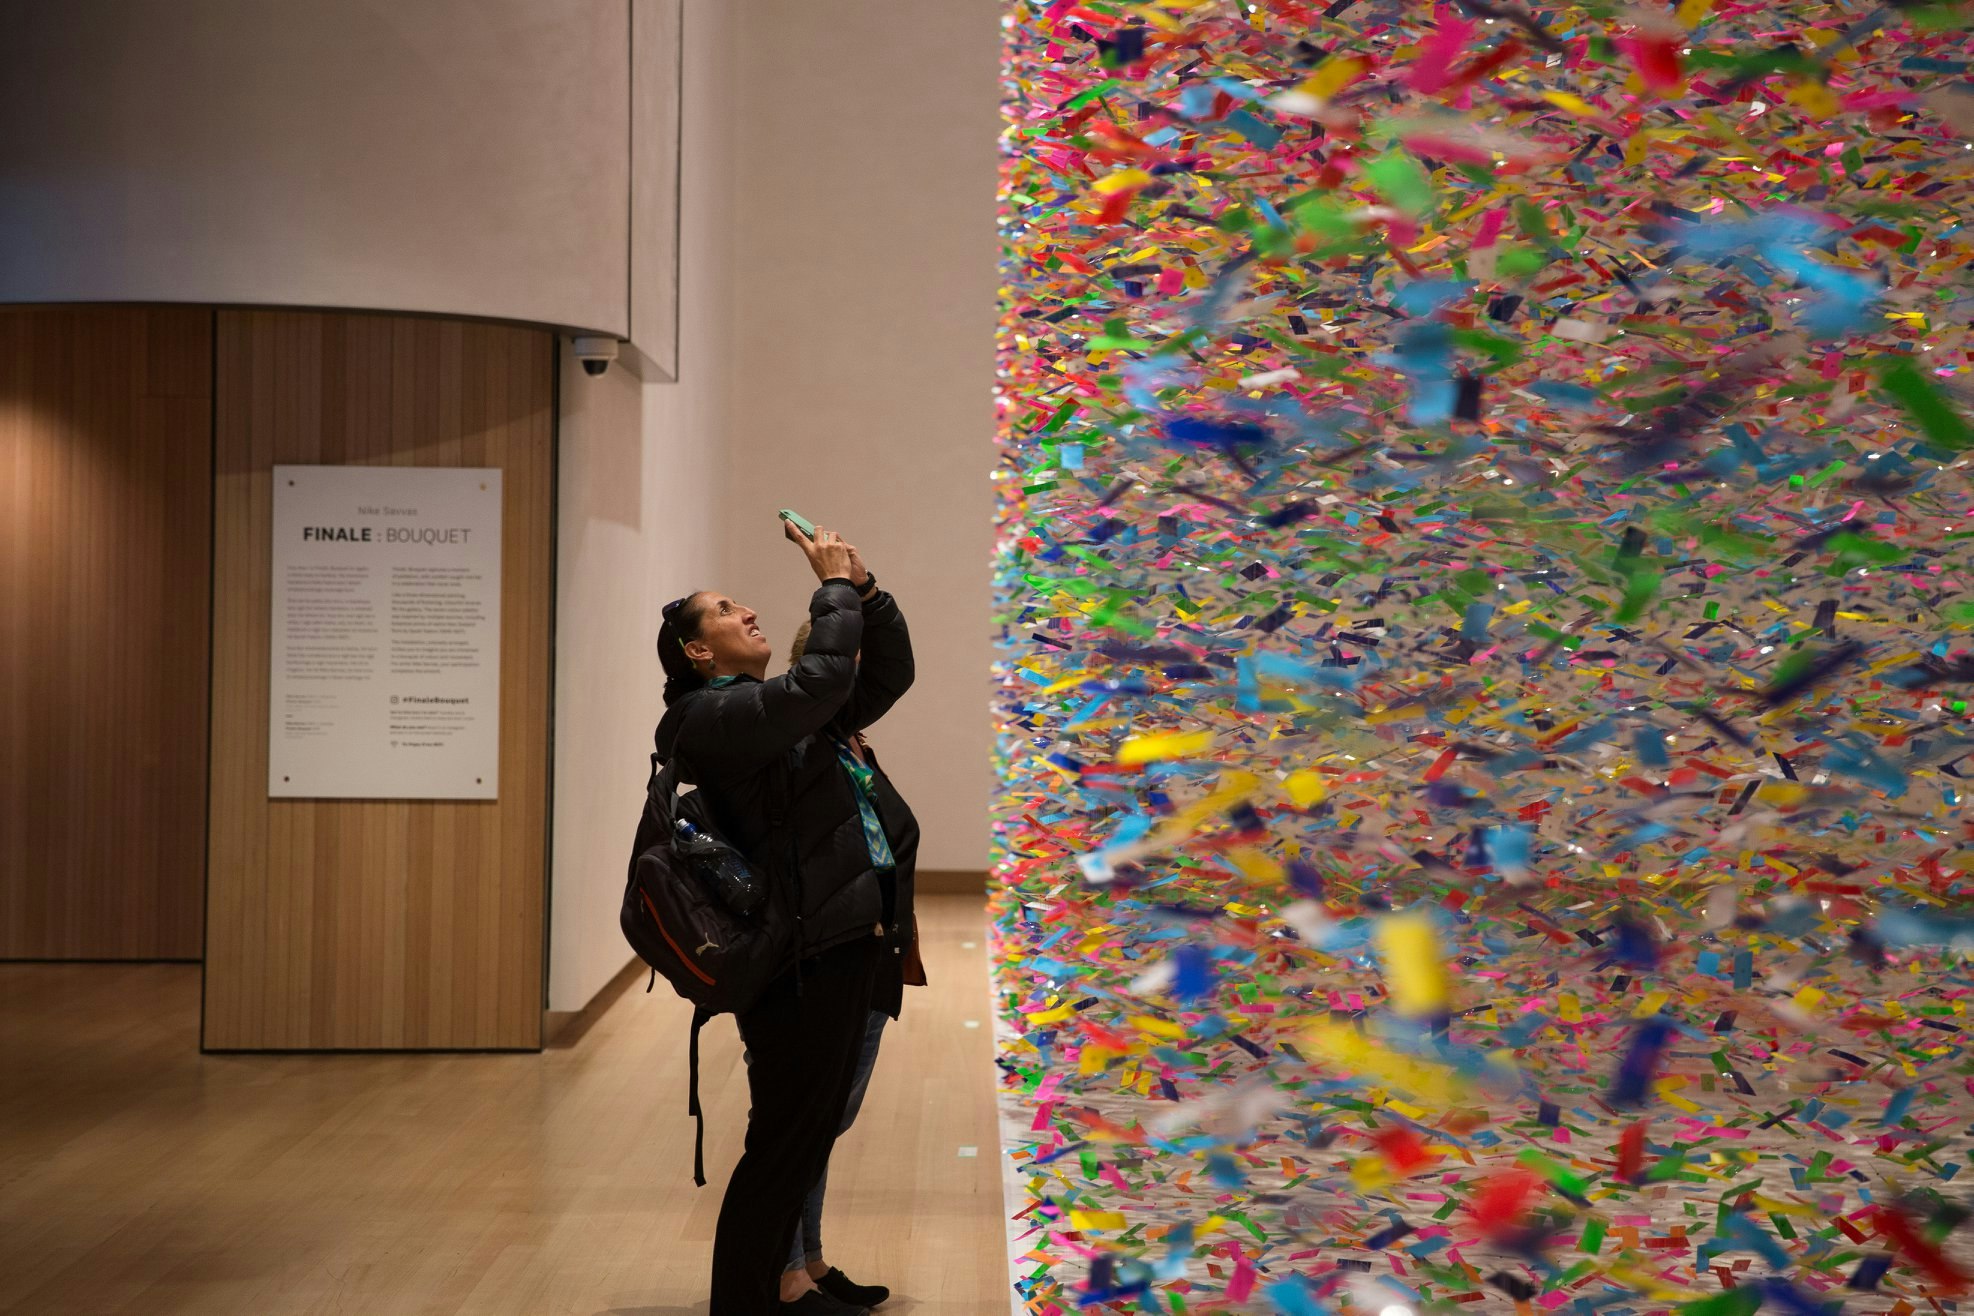 A visitor trying to capture the scale of a colourful artwork